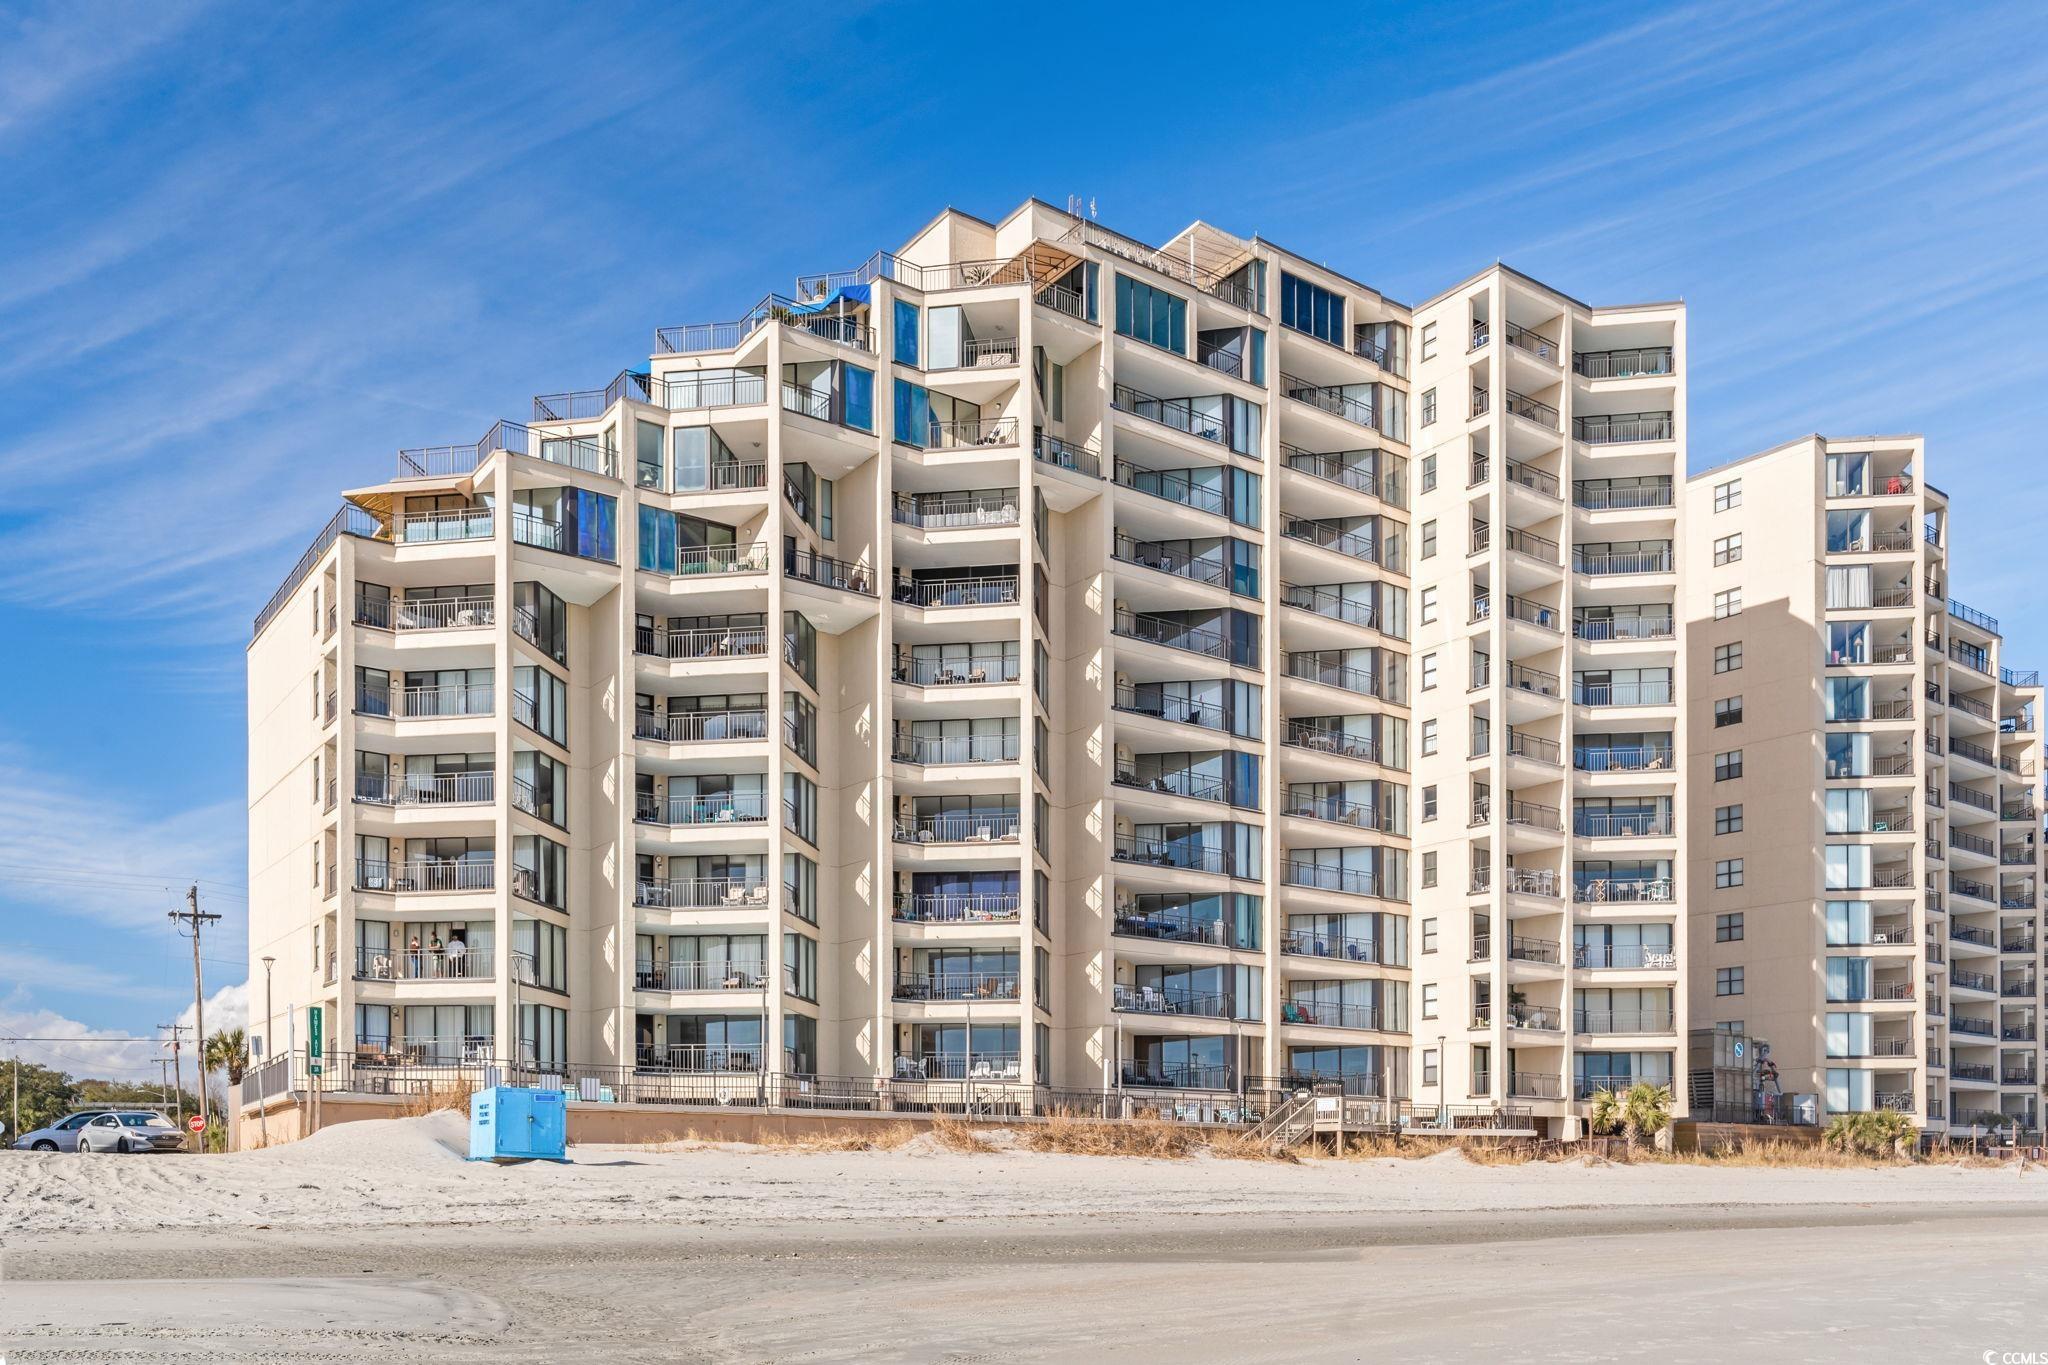 a spectacular oceanfront condo at one of the most popular buildings in garden city beach– surfmaster ii! a beautifully updated 1 bed, 1.5 bath condo with unmatched oceanfront views from the large 7th floor balcony. updated with stainless steel appliances, modern kitchen backsplash, fresh paint on the ceiling & walls, shiplap accent, modern bathroom vanity, newer living room, dining room & bedroom furniture including mattress, new washer/dryer, newer hvac, beachy décor, wall art and more! enjoy this coastal getaway for the weekend, for the season or all year! access to the condo is super easy with multiple elevators and plenty of garage parking. outdoor pools, hot tubs, oceanfront property and expansive views from unit 713 provide amazing opportunities for enjoying the sunrise, shoreline, beach activities and more! invest in one of the most popular oceanfront buildings in garden city beach – surfmaster ii – known for superb rental demand and the perfect location in garden city beach! the best vacation spot & rental property is for sale now @ surfmaster ii unit 713! don’t hesitate!